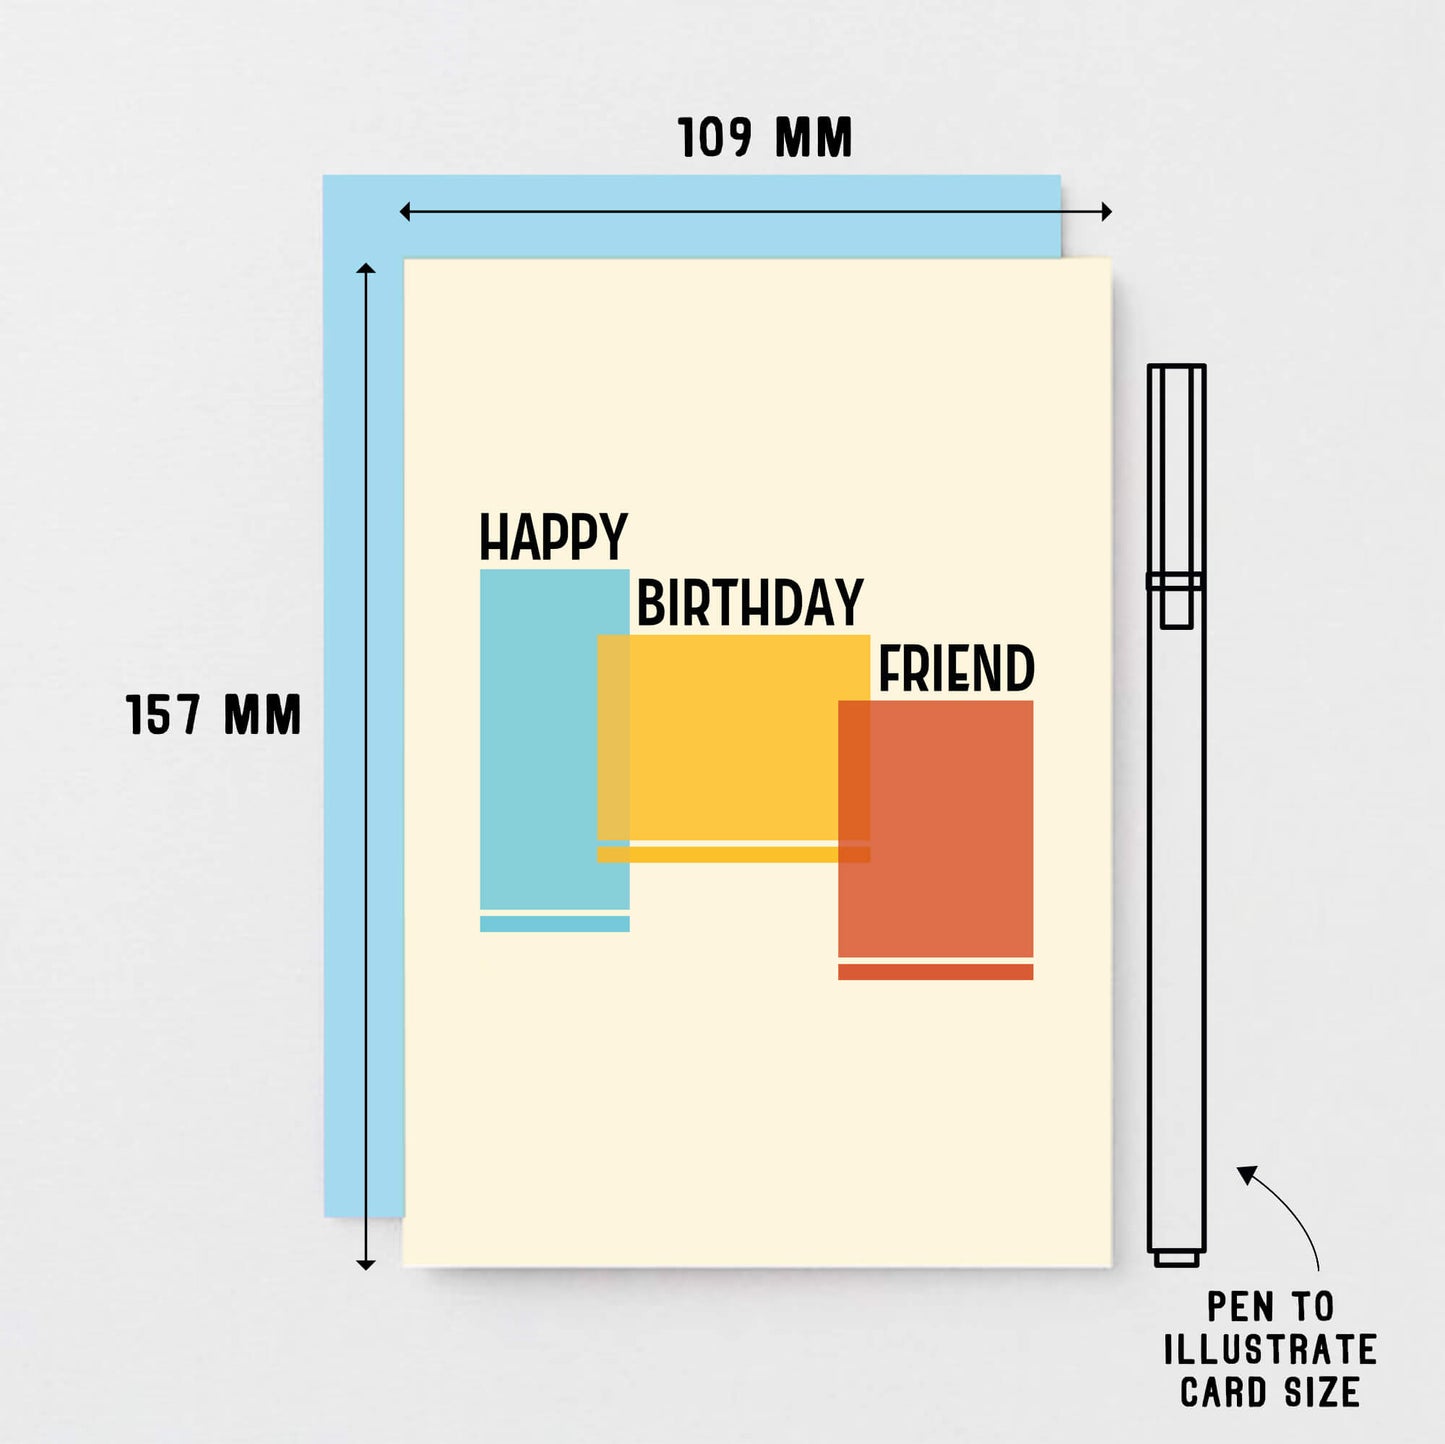 Happy Birthday Friend Card by SixElevenCreations. Product Code SE4501A6